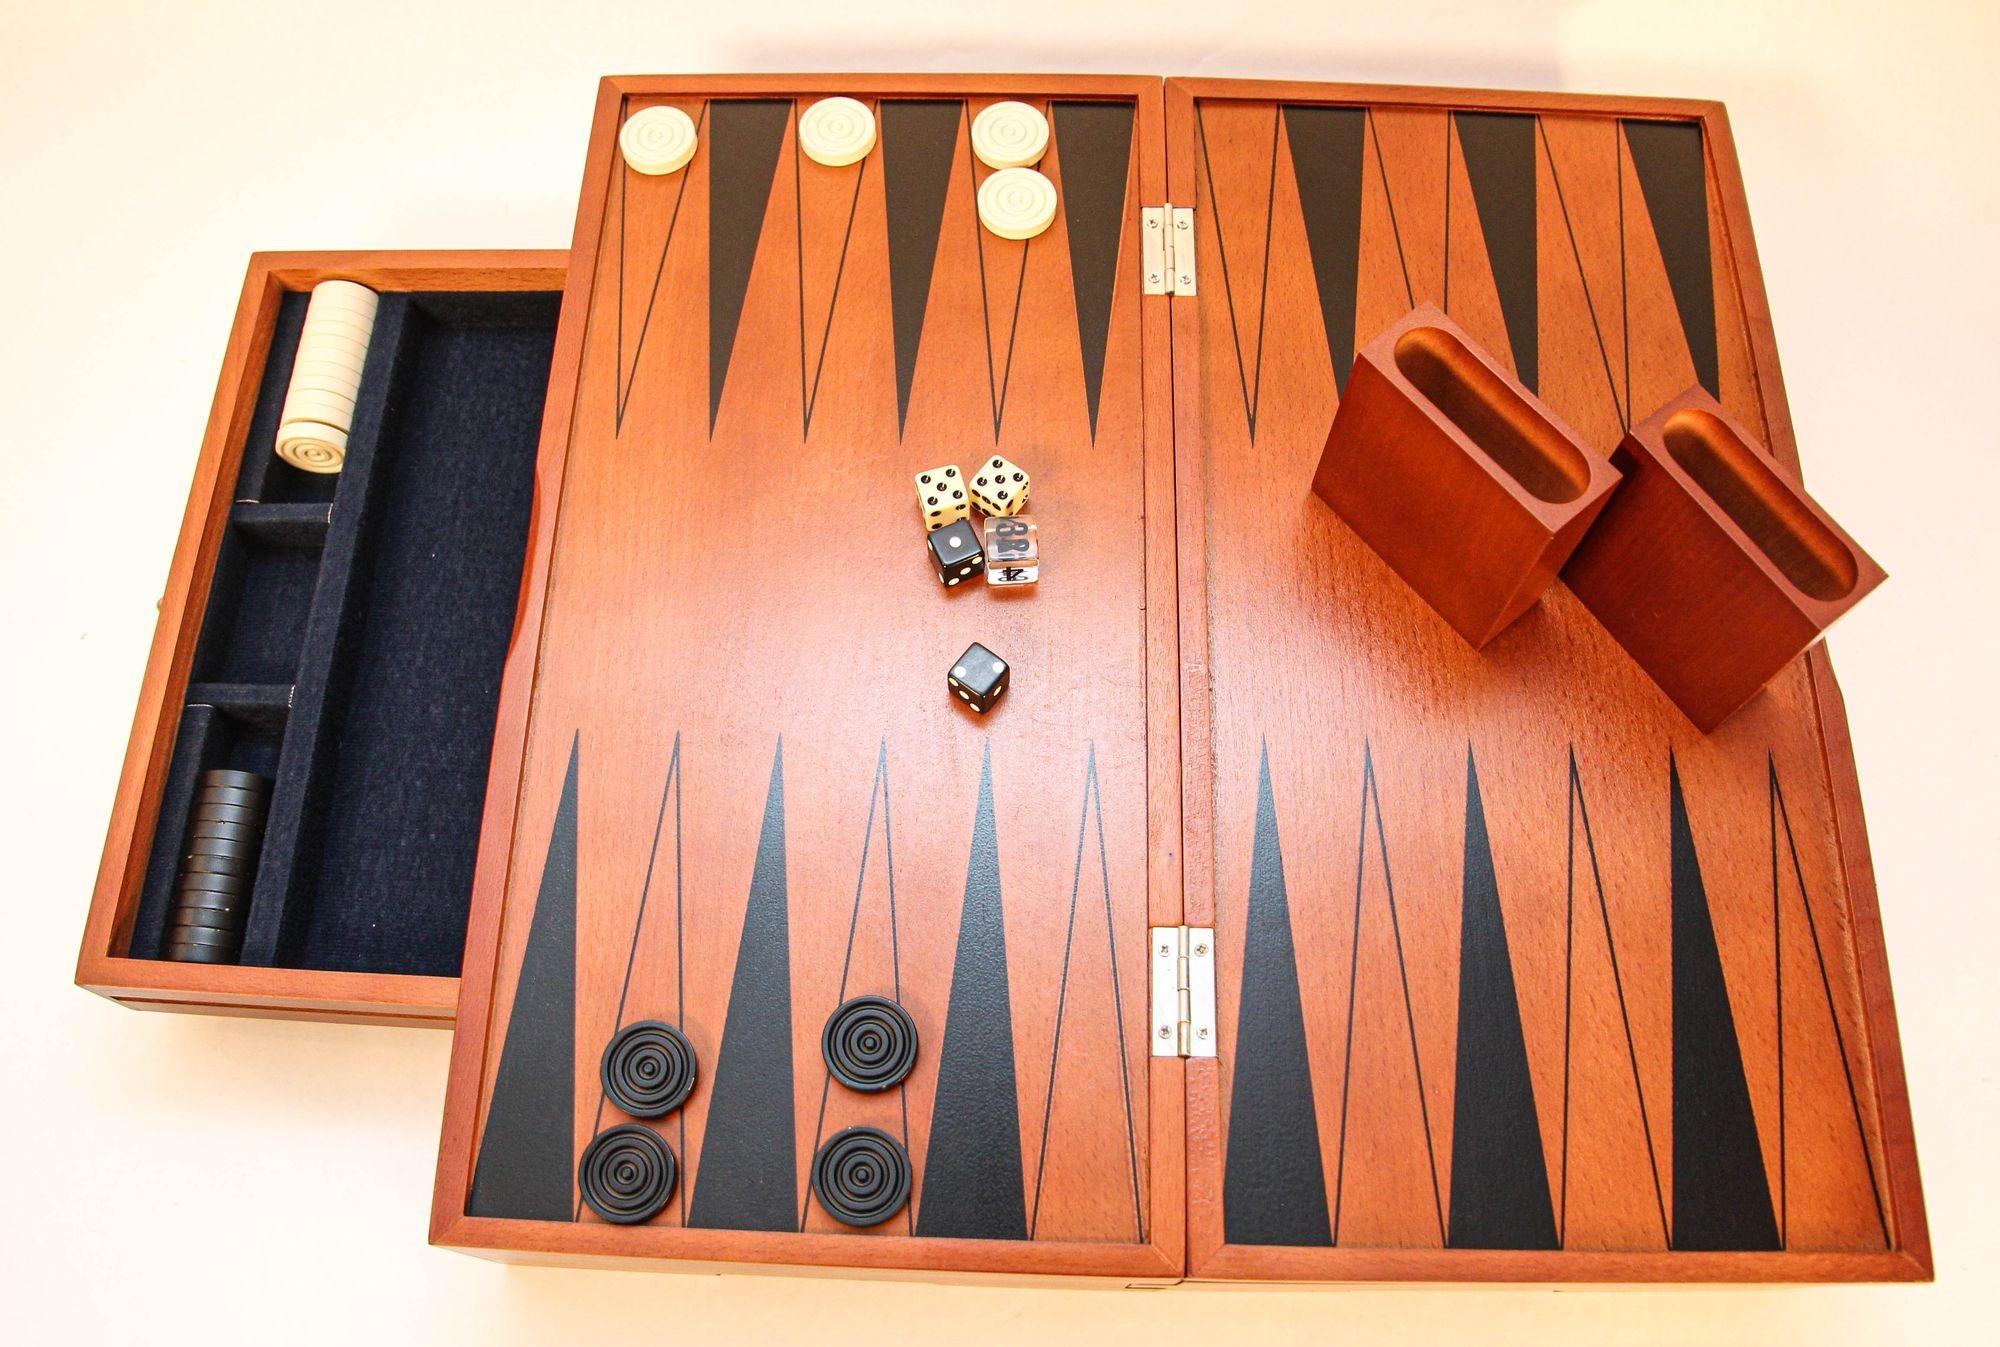 Michael Graves, Original Postmodern backgammon set, vintage game.
A Michael Graves Backgammon Game Set.
A backgammon board designed by famed architect Michael Graves.
Signed with metal tag.
Finely constructed of cherry stained hardwood and